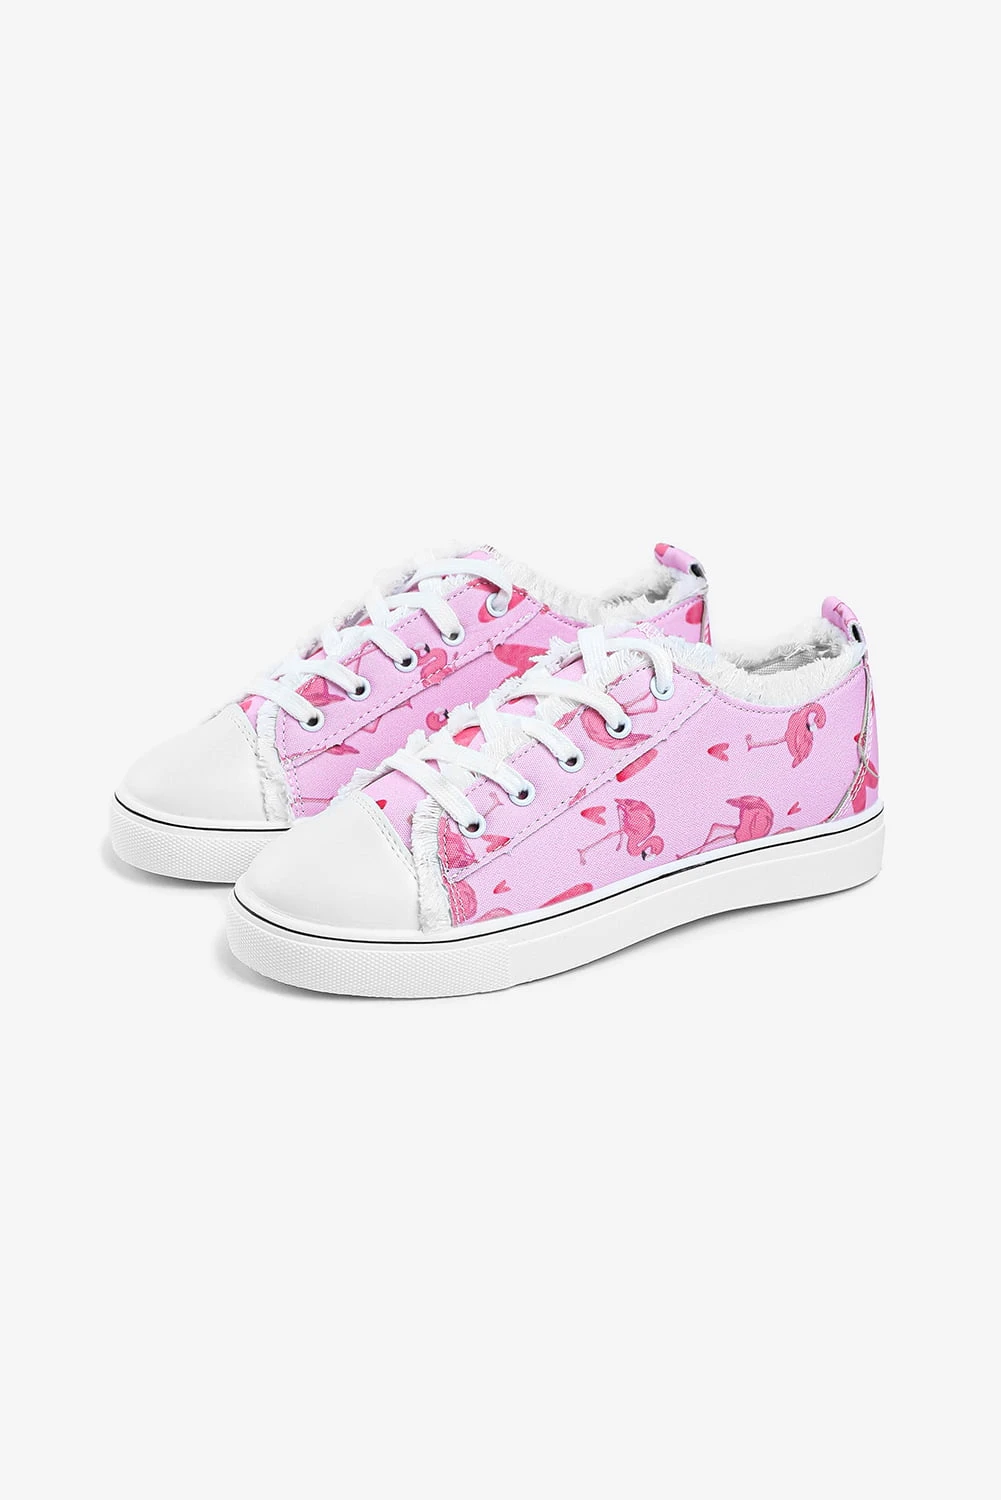 Pink Flamingo Heart-shaped Flat Shoes Canvas Shoes $ 28.99 - Evaless